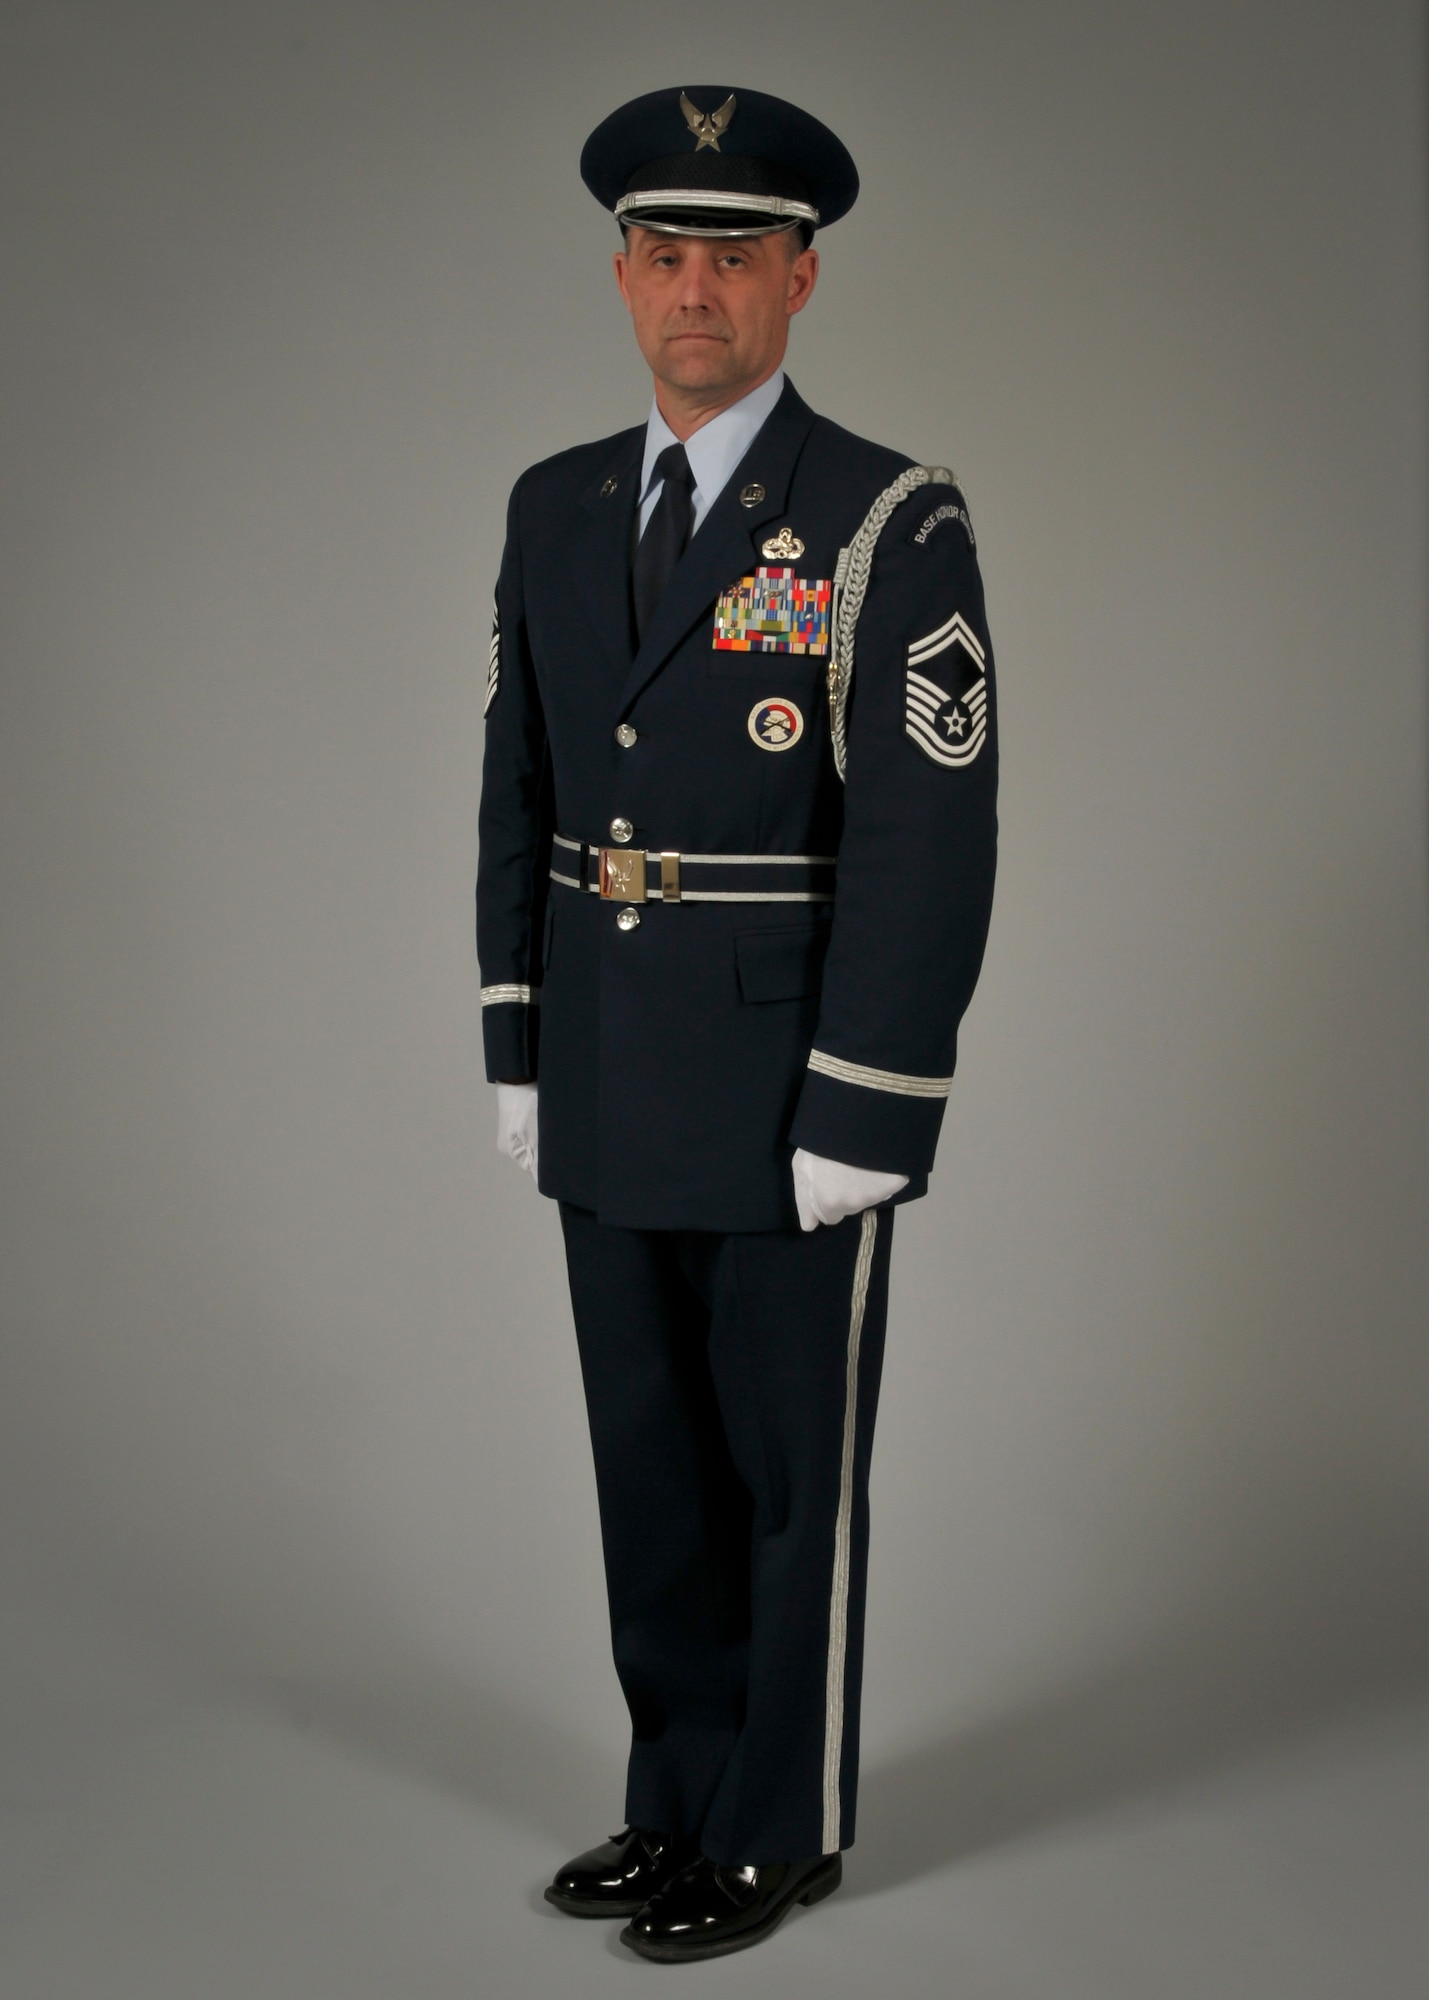 Senior Master Sgt. Gerald J. Depotsie Jr., the maintenance squadron fabrication supervisor and dedicated member of the 128th Refueling Wing Base Honor Guard since 1995, was announced as the Wisconsin Air National Guard Honor Guard Member of the Year.